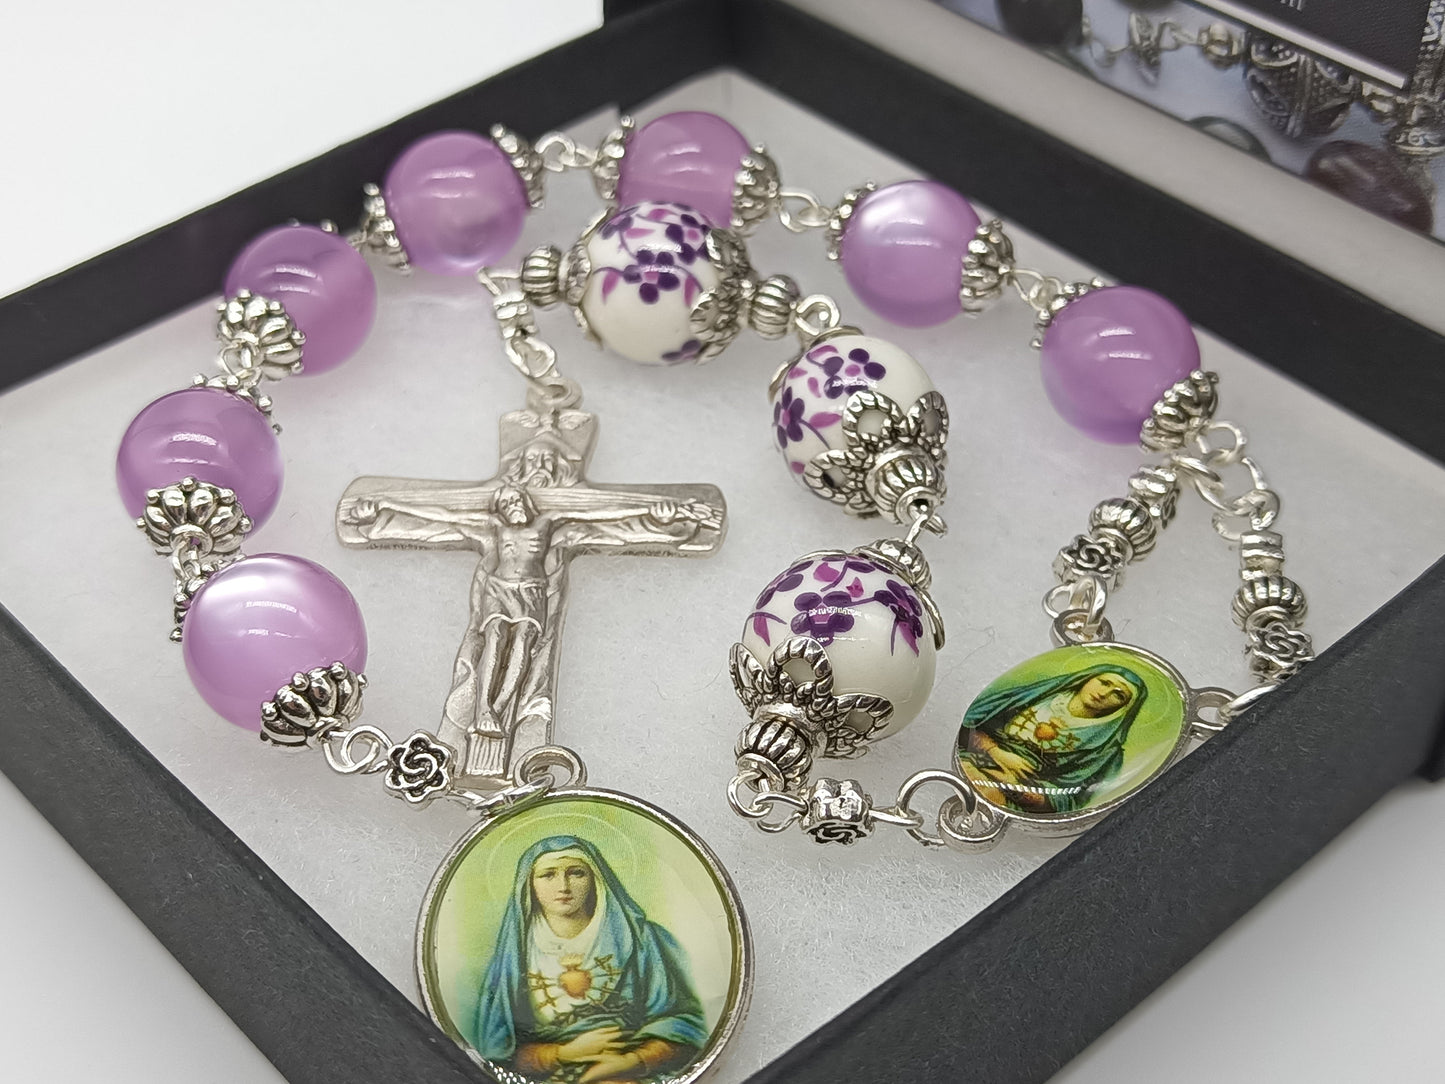 Our Lady of Sorrows Dolor Servite prayer Beads, Pocket Dolor Rosary beads, Our Lady of Sorrows prayer chaplet rosaries, pocket prayer beads.